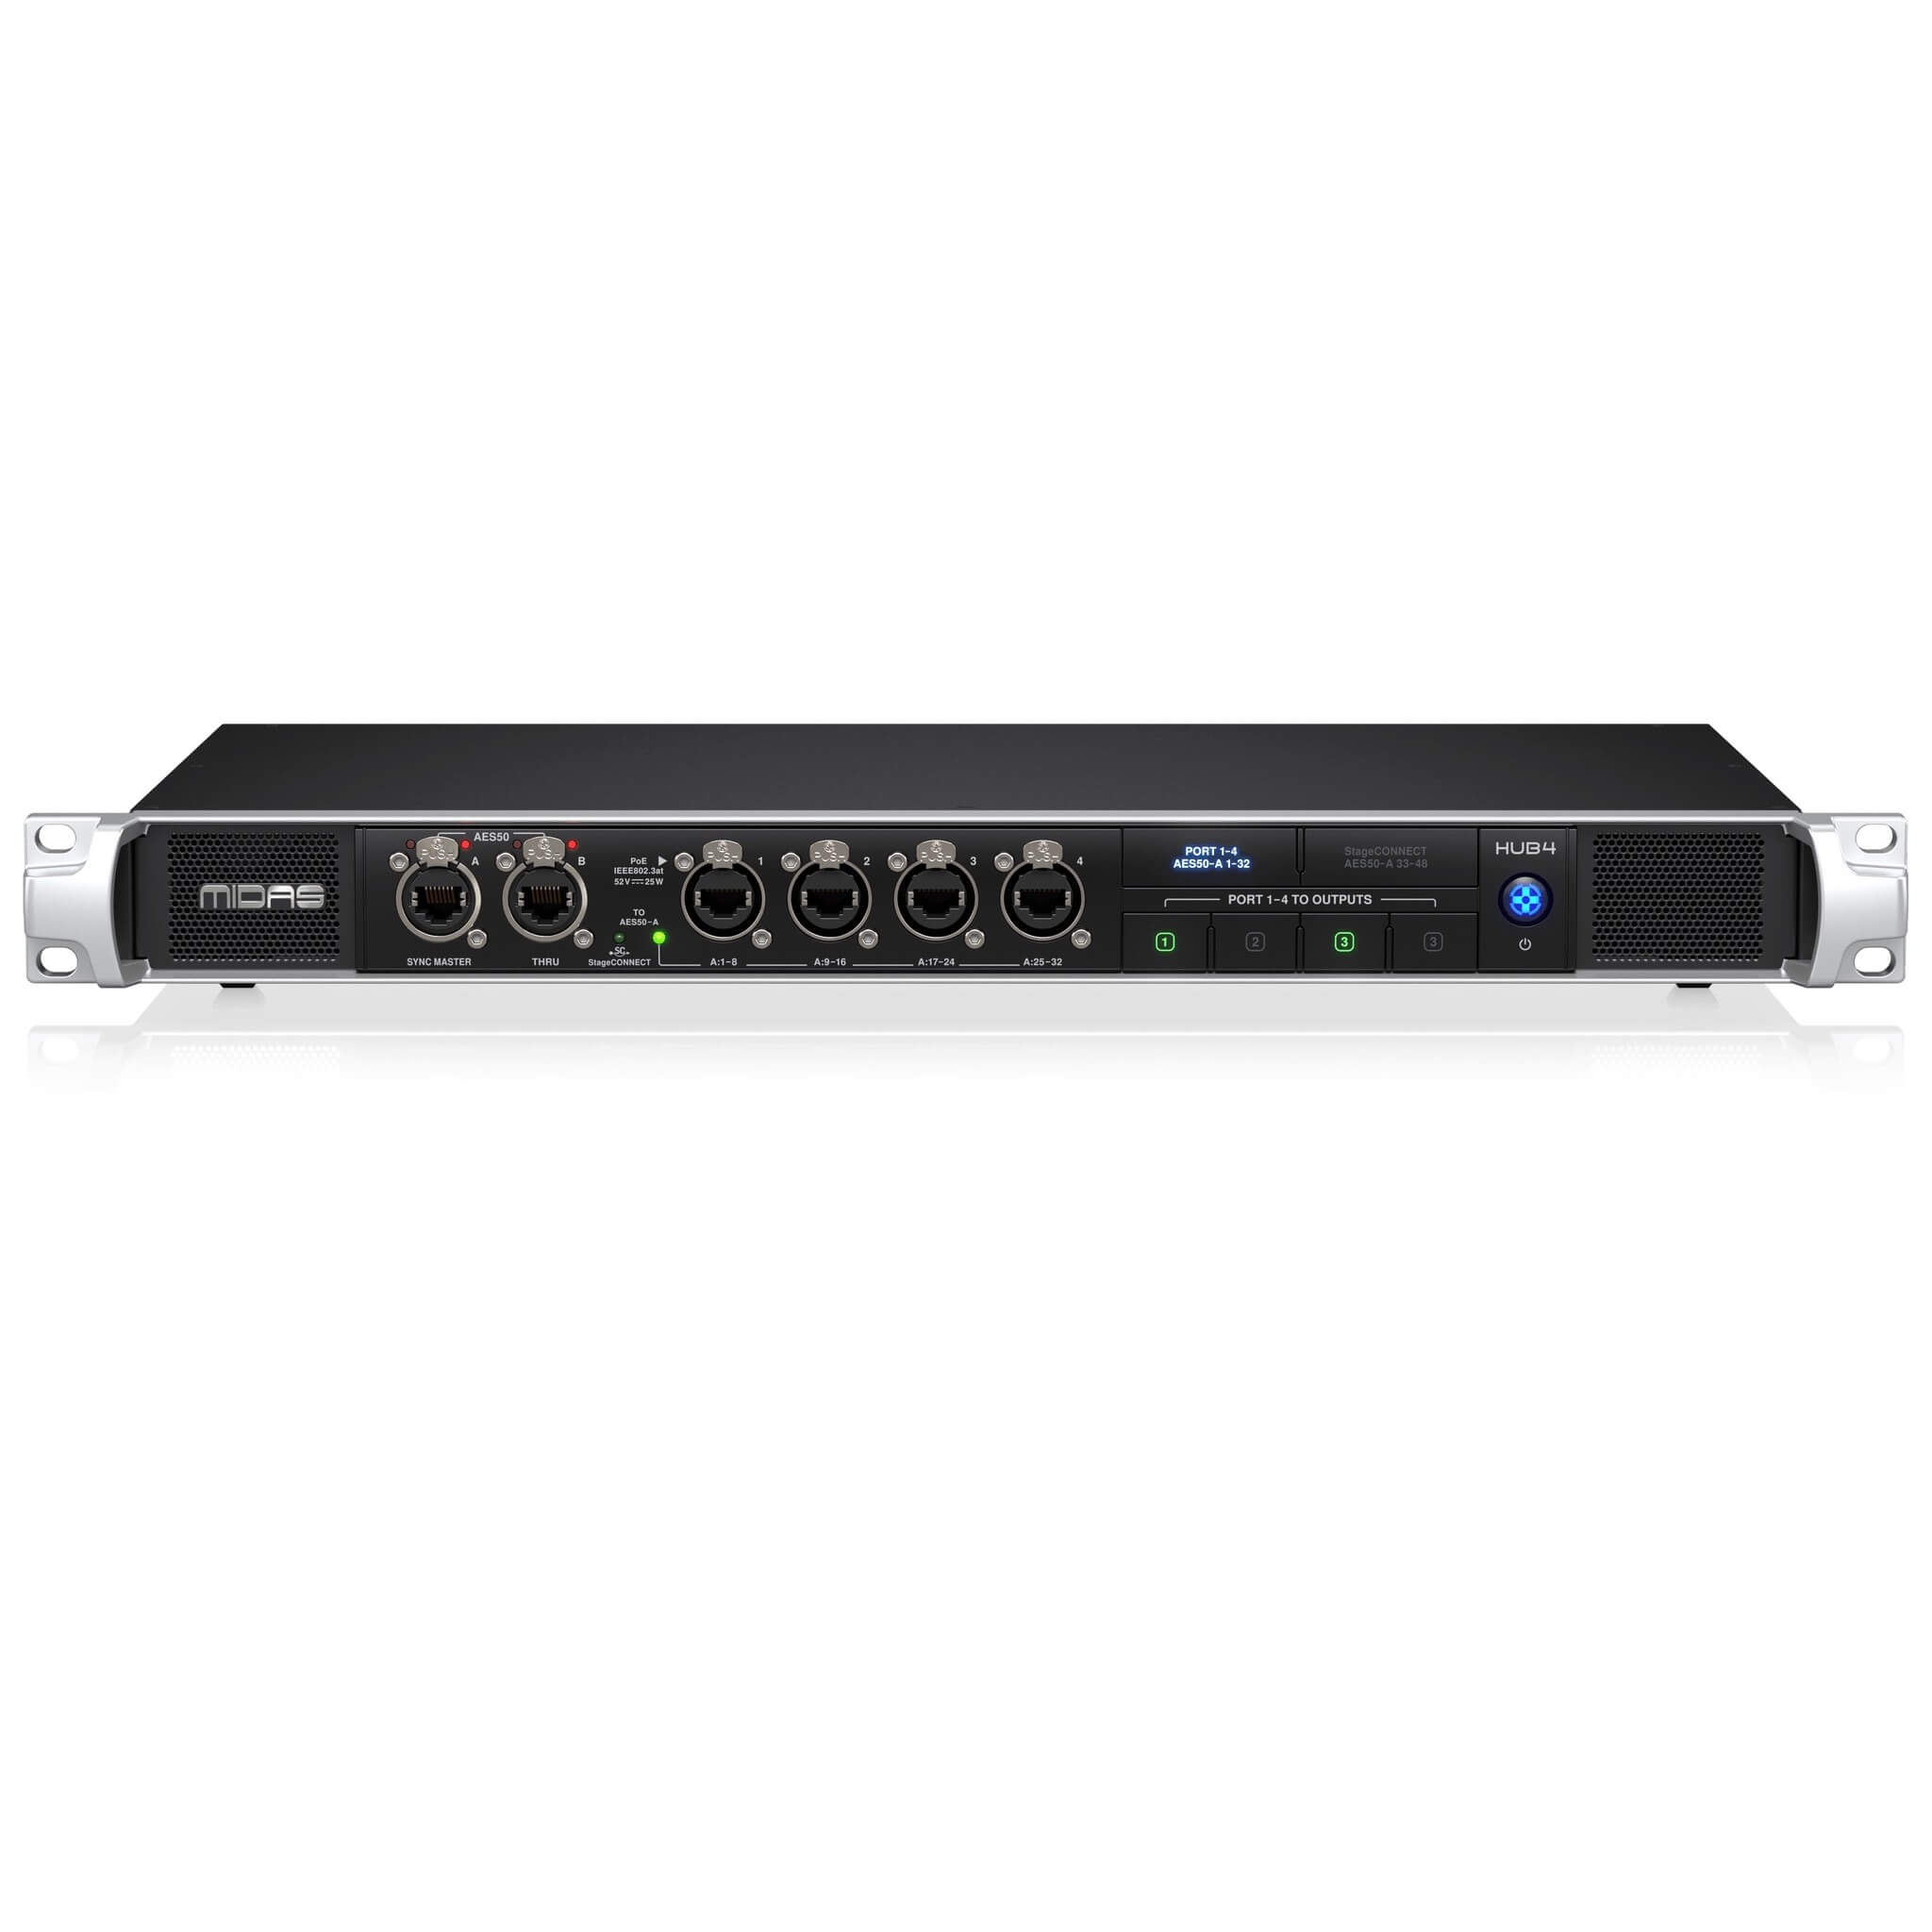 Midas HUB4 - Monitor System Hub with 4 PoE Ports for Personal Mixers, front top